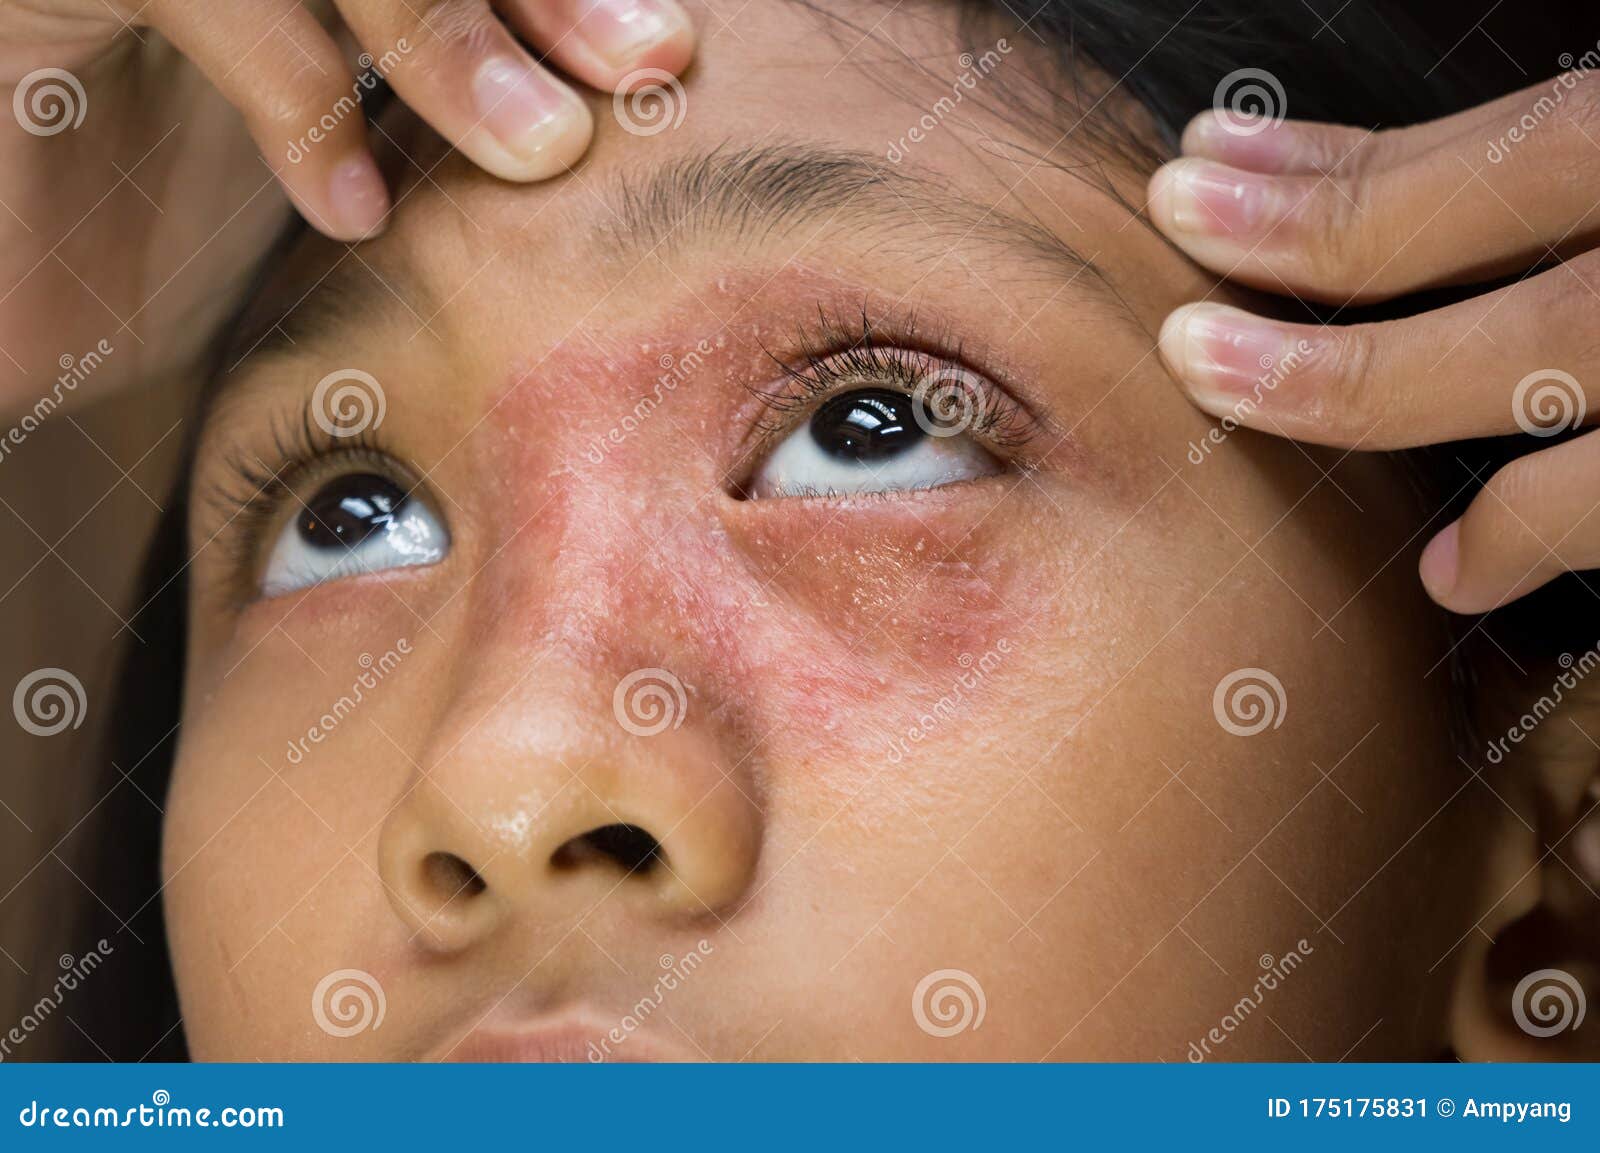 southeast asian ethnicity teenage girl with circular  dry skin rash on her face around the eye and nose, tinea corporis